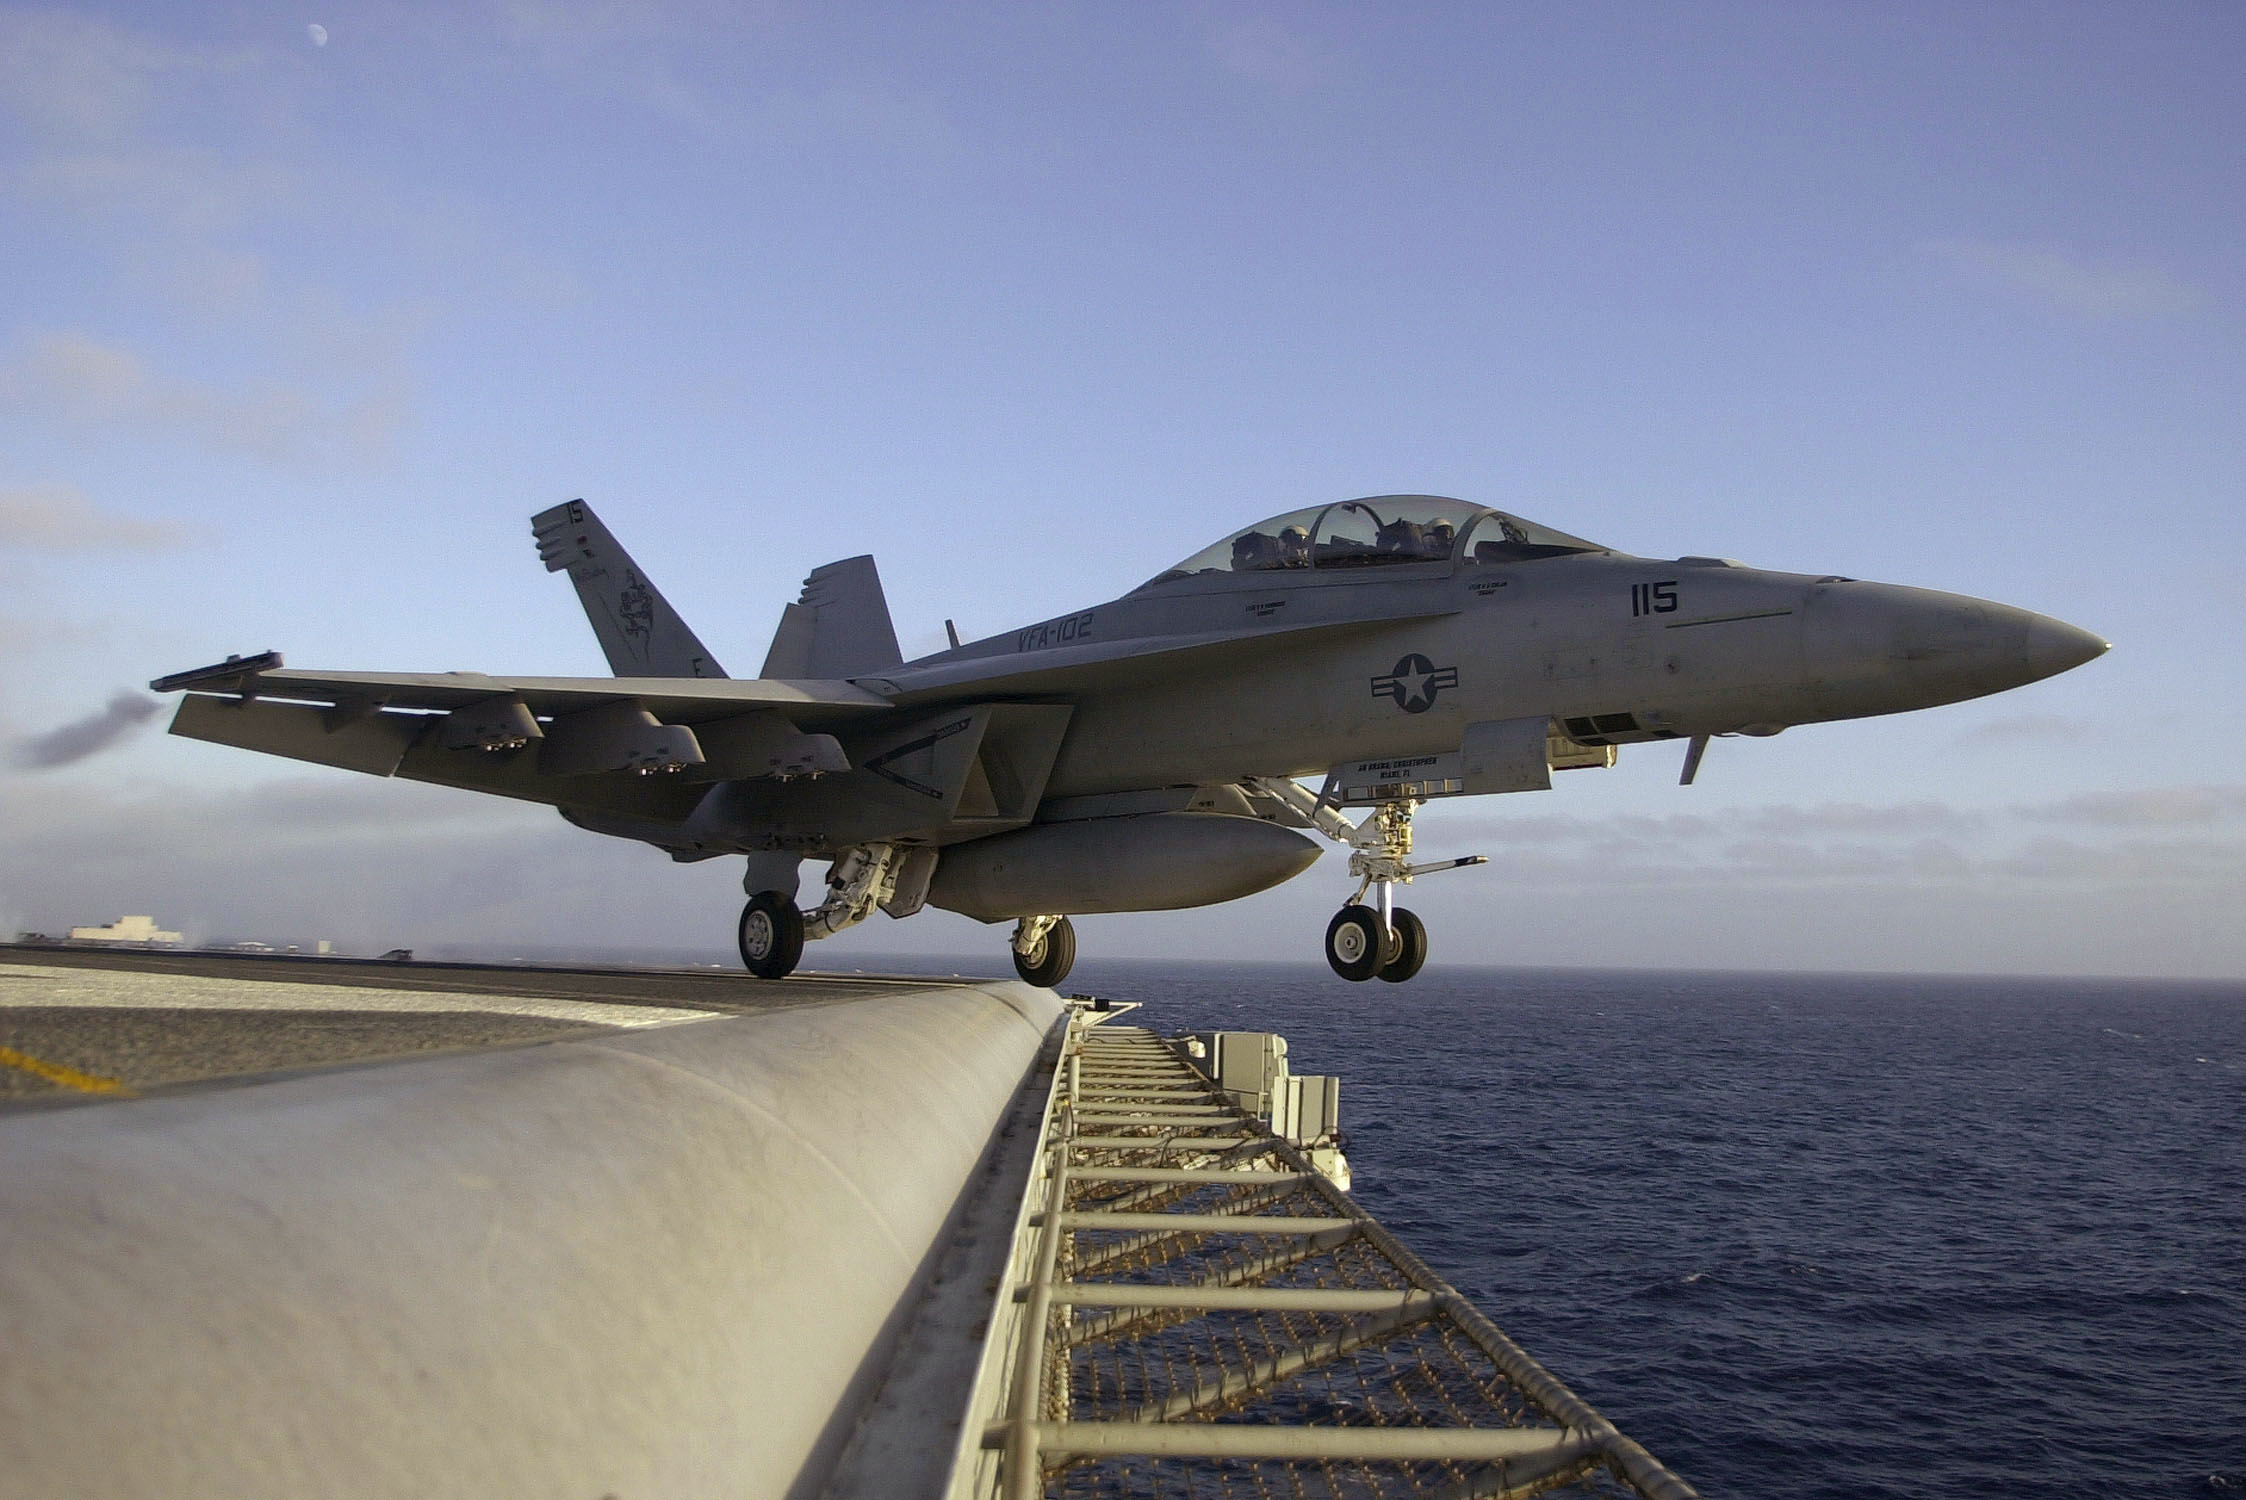 US Navy 030807-N-6213R-439 A F-A-18F Super Hornet launches off the flight deck of USS John C. Stennis (CVN 74) during a scheduled training exercise